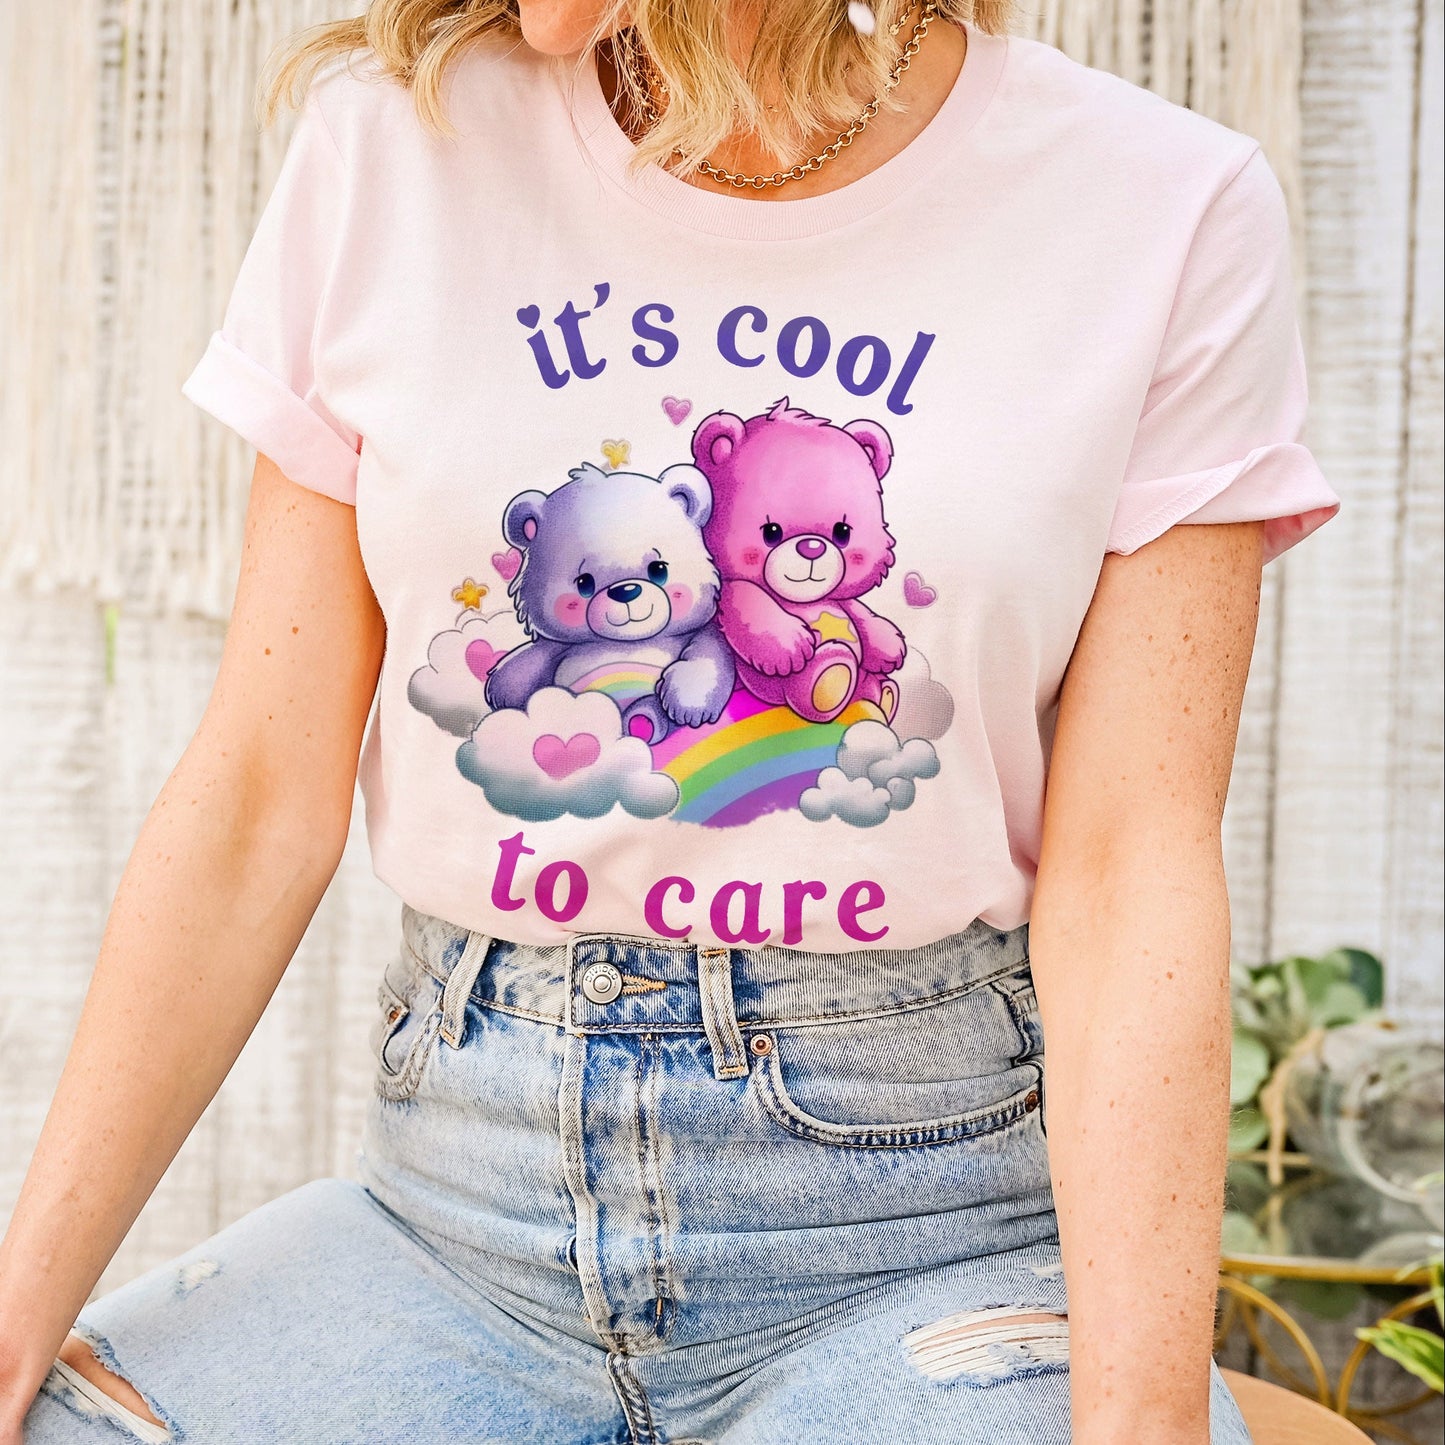 It's Cool To Care Illustrated Bears that Care 80s 1980s Army Brat Nostalgia AI Generated Parody Tee Unisex Soft Tee T-shirt for Women or Men